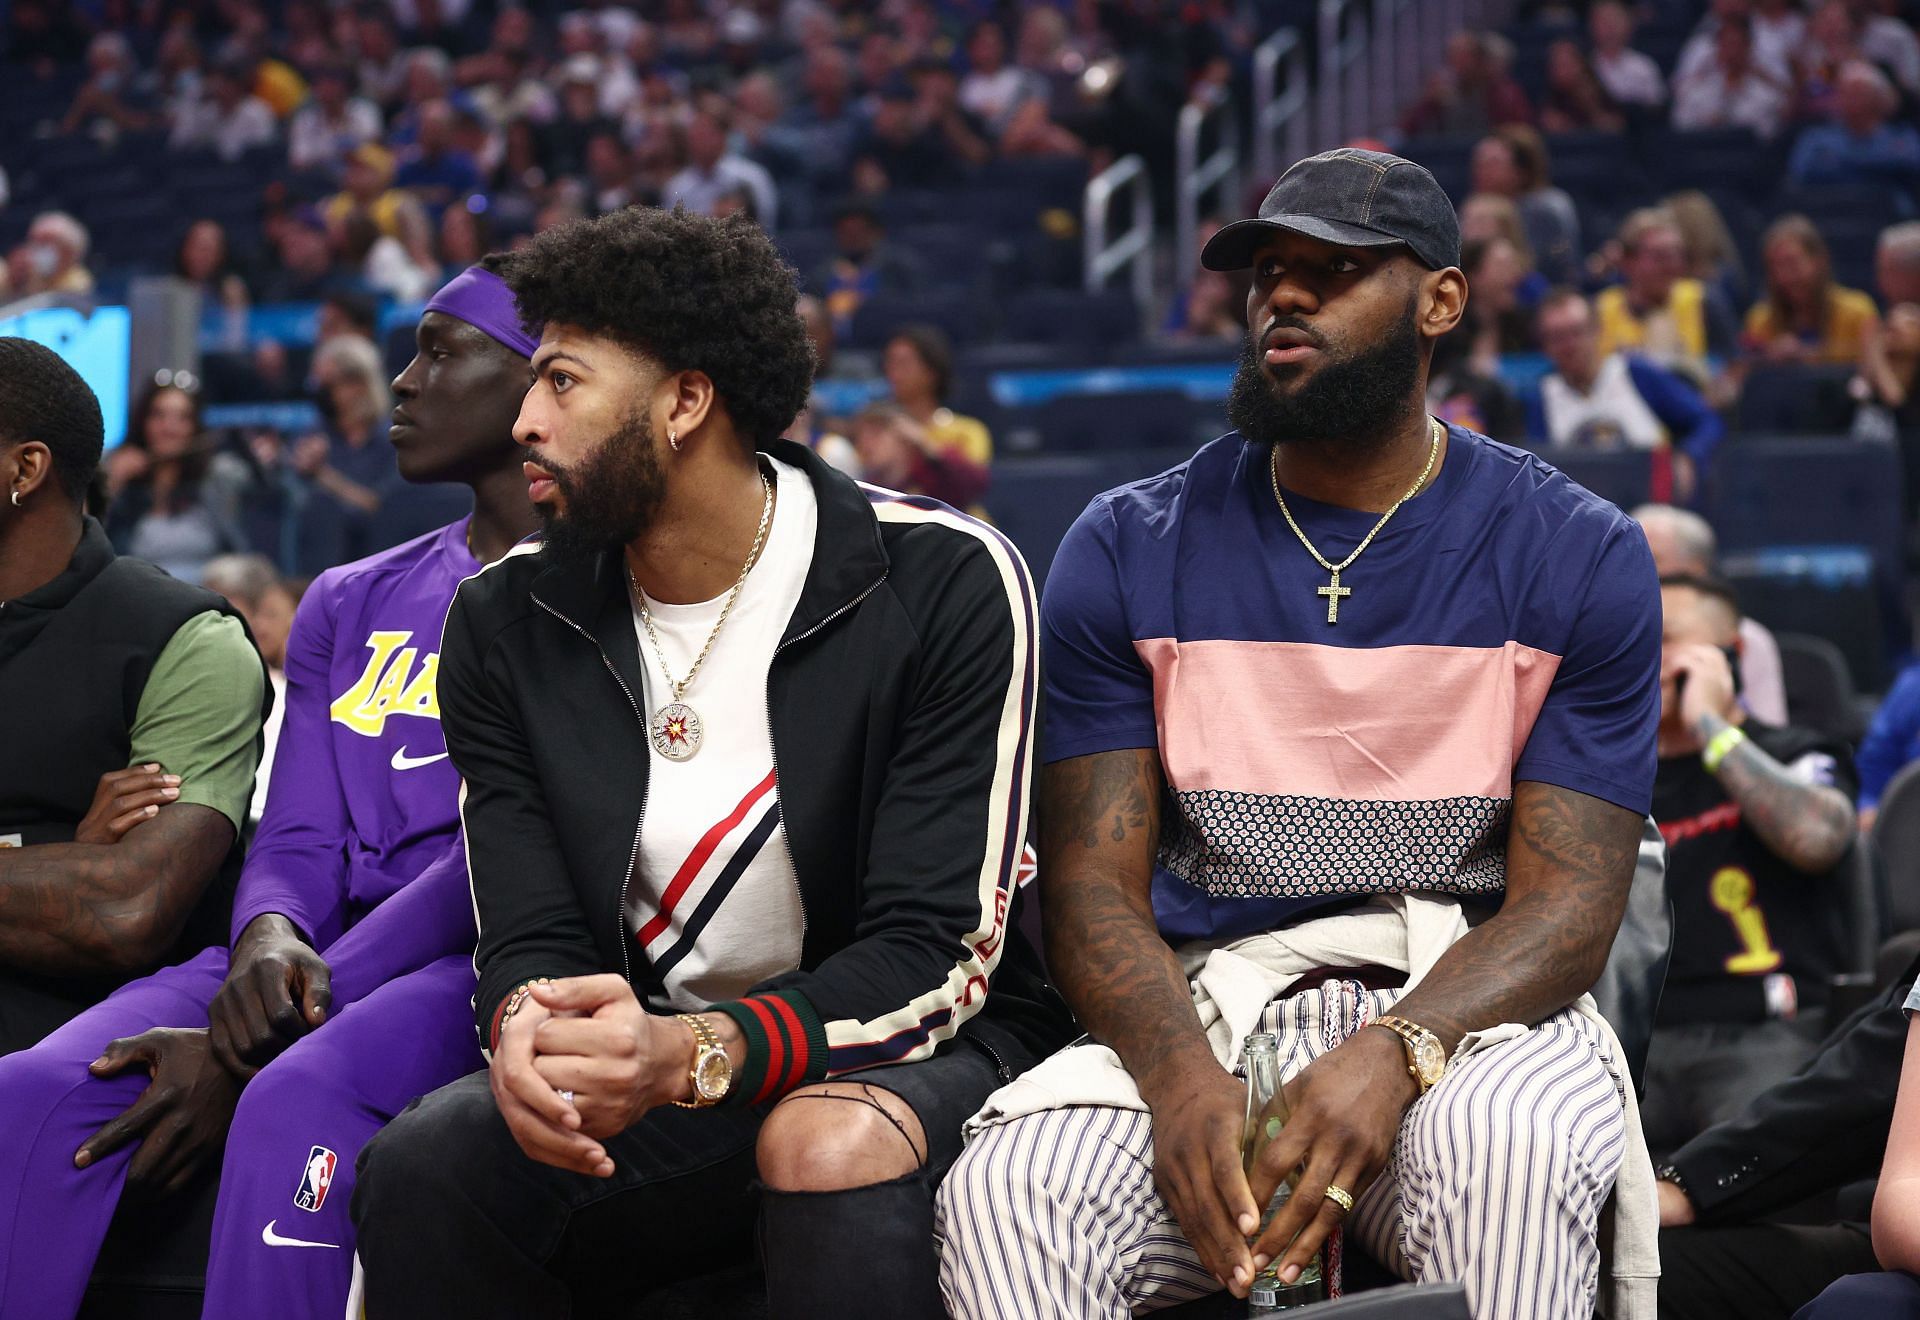 Anthony Davis (left) and LeBron James (right) of the LA Lakers on the bench